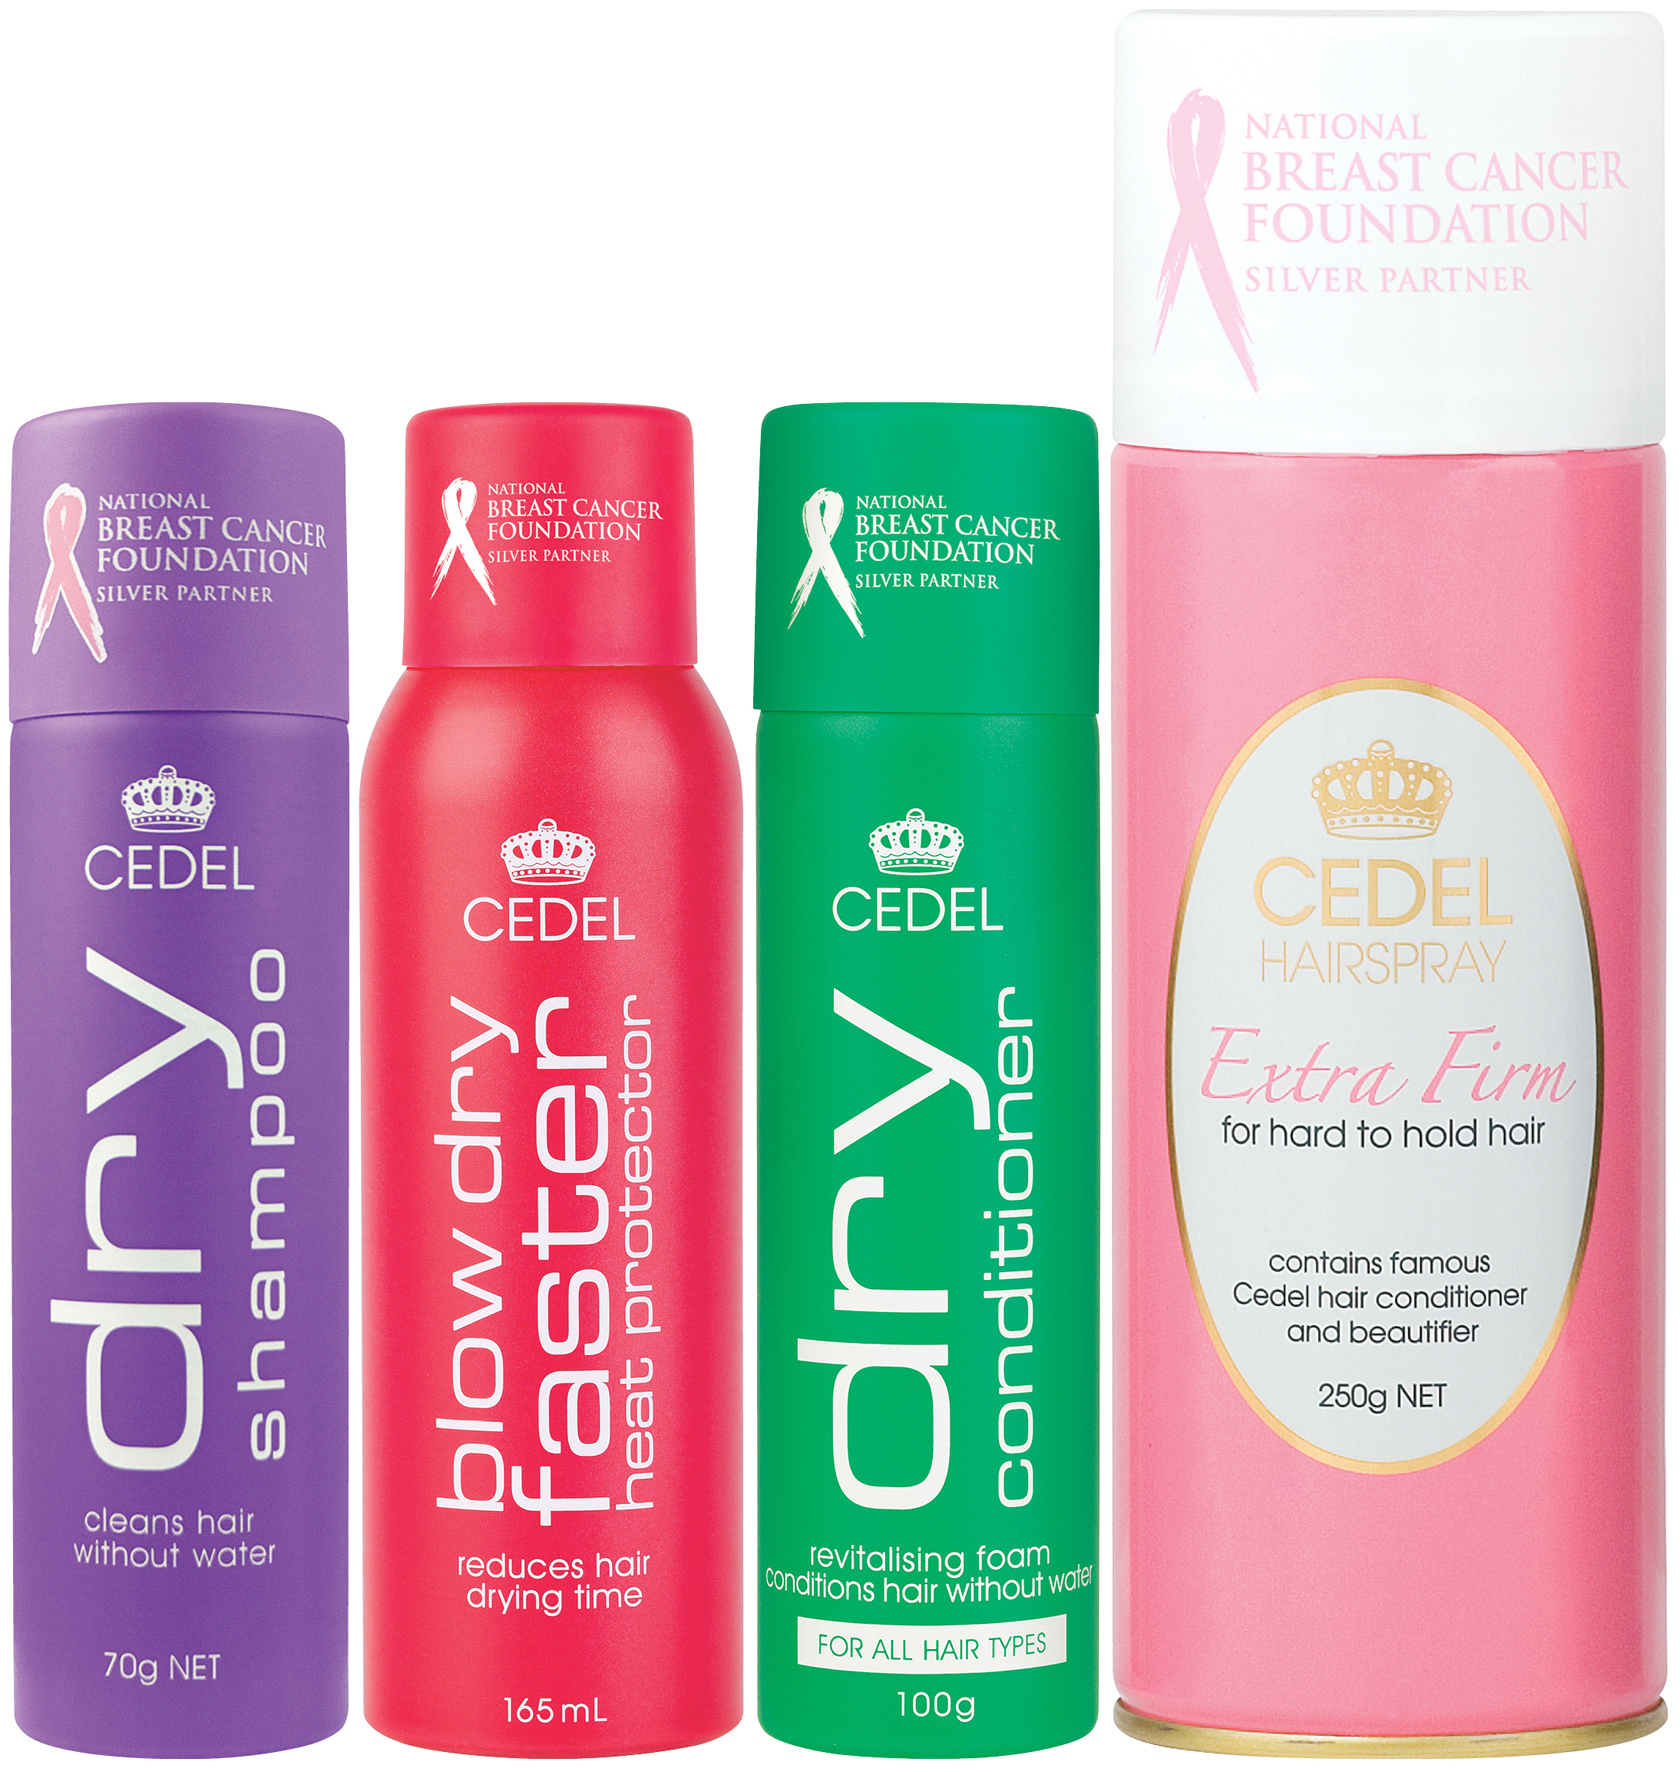 cedel hair products